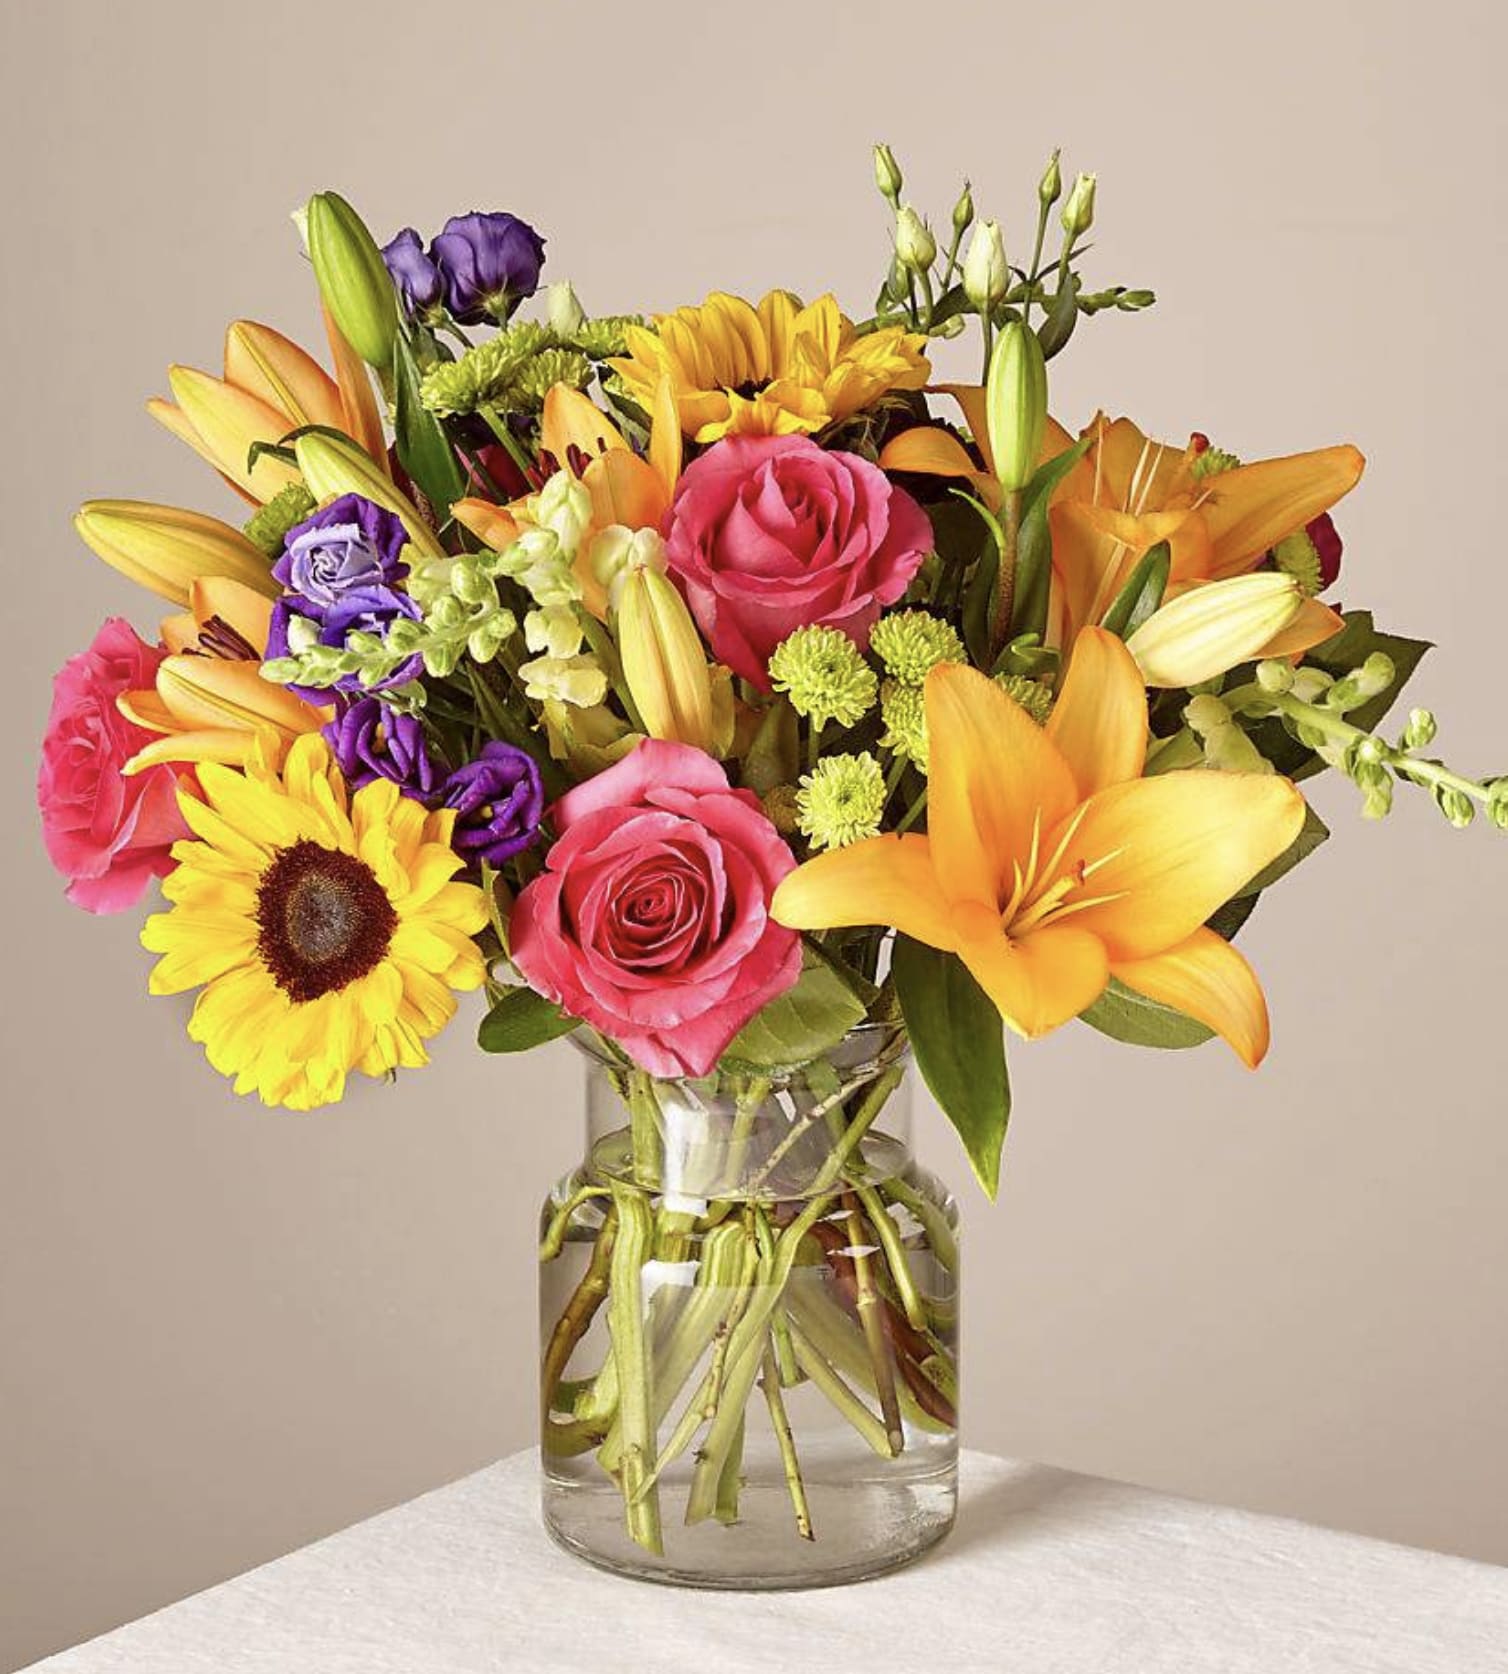 Best Day Bouquet - Make this day their best day. Our local florist handcraft a colorful array of flowers in a clear glass vase to create a celebration in bloom. Perfect to give for a special reason or to simply share a smile.